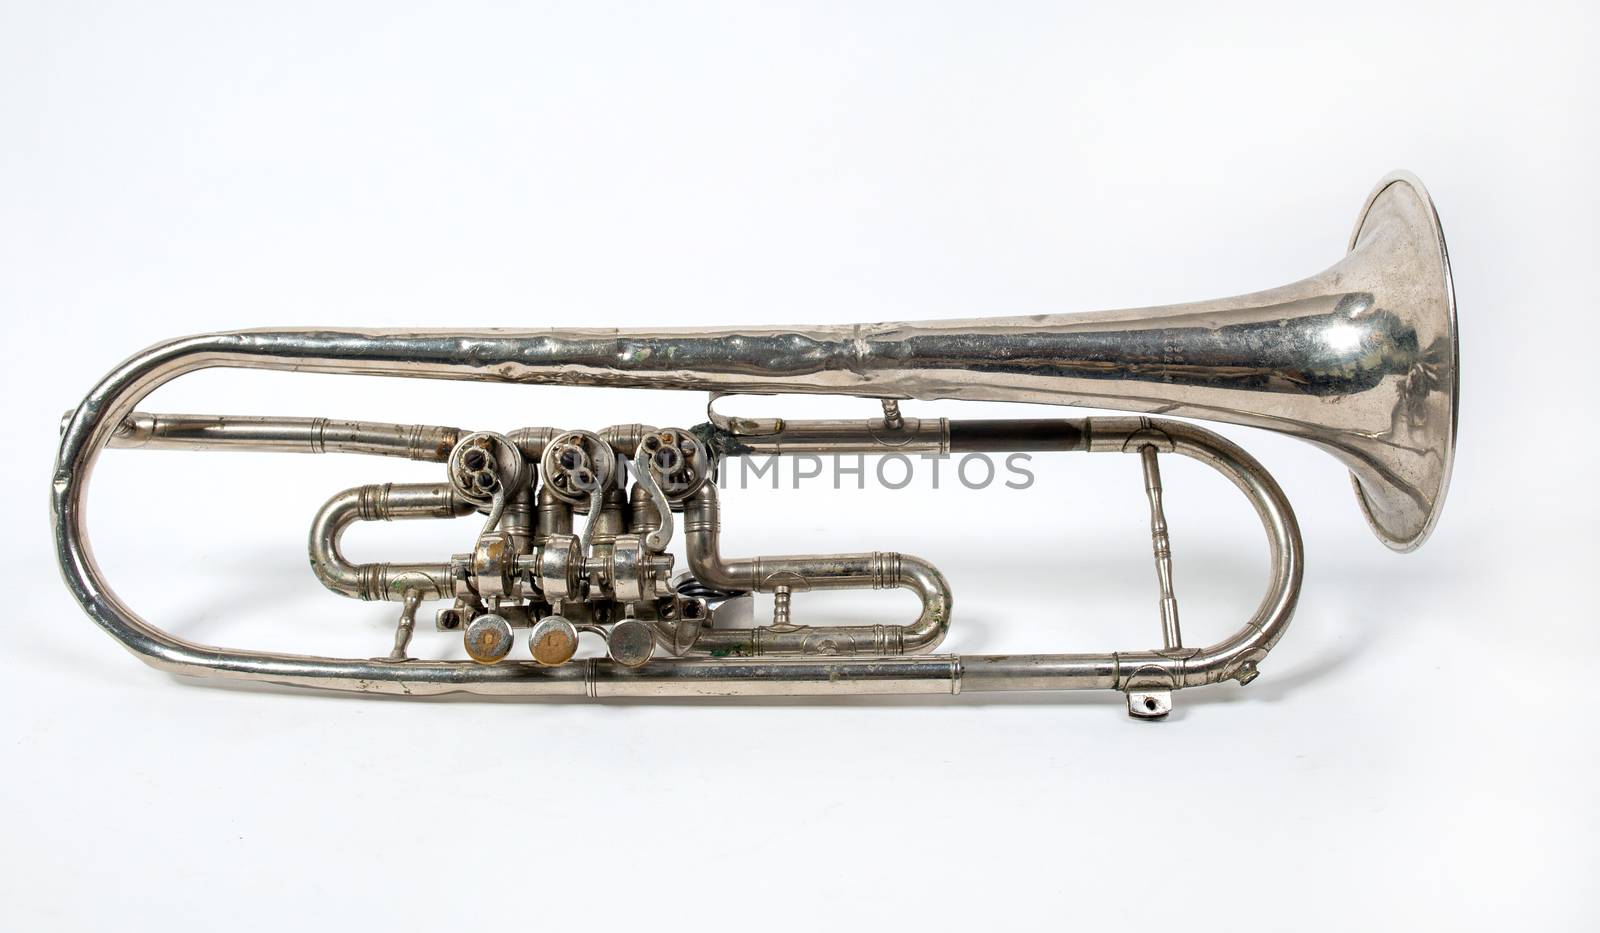 silver trumpet old isolated on a white background. Musical instrument lies